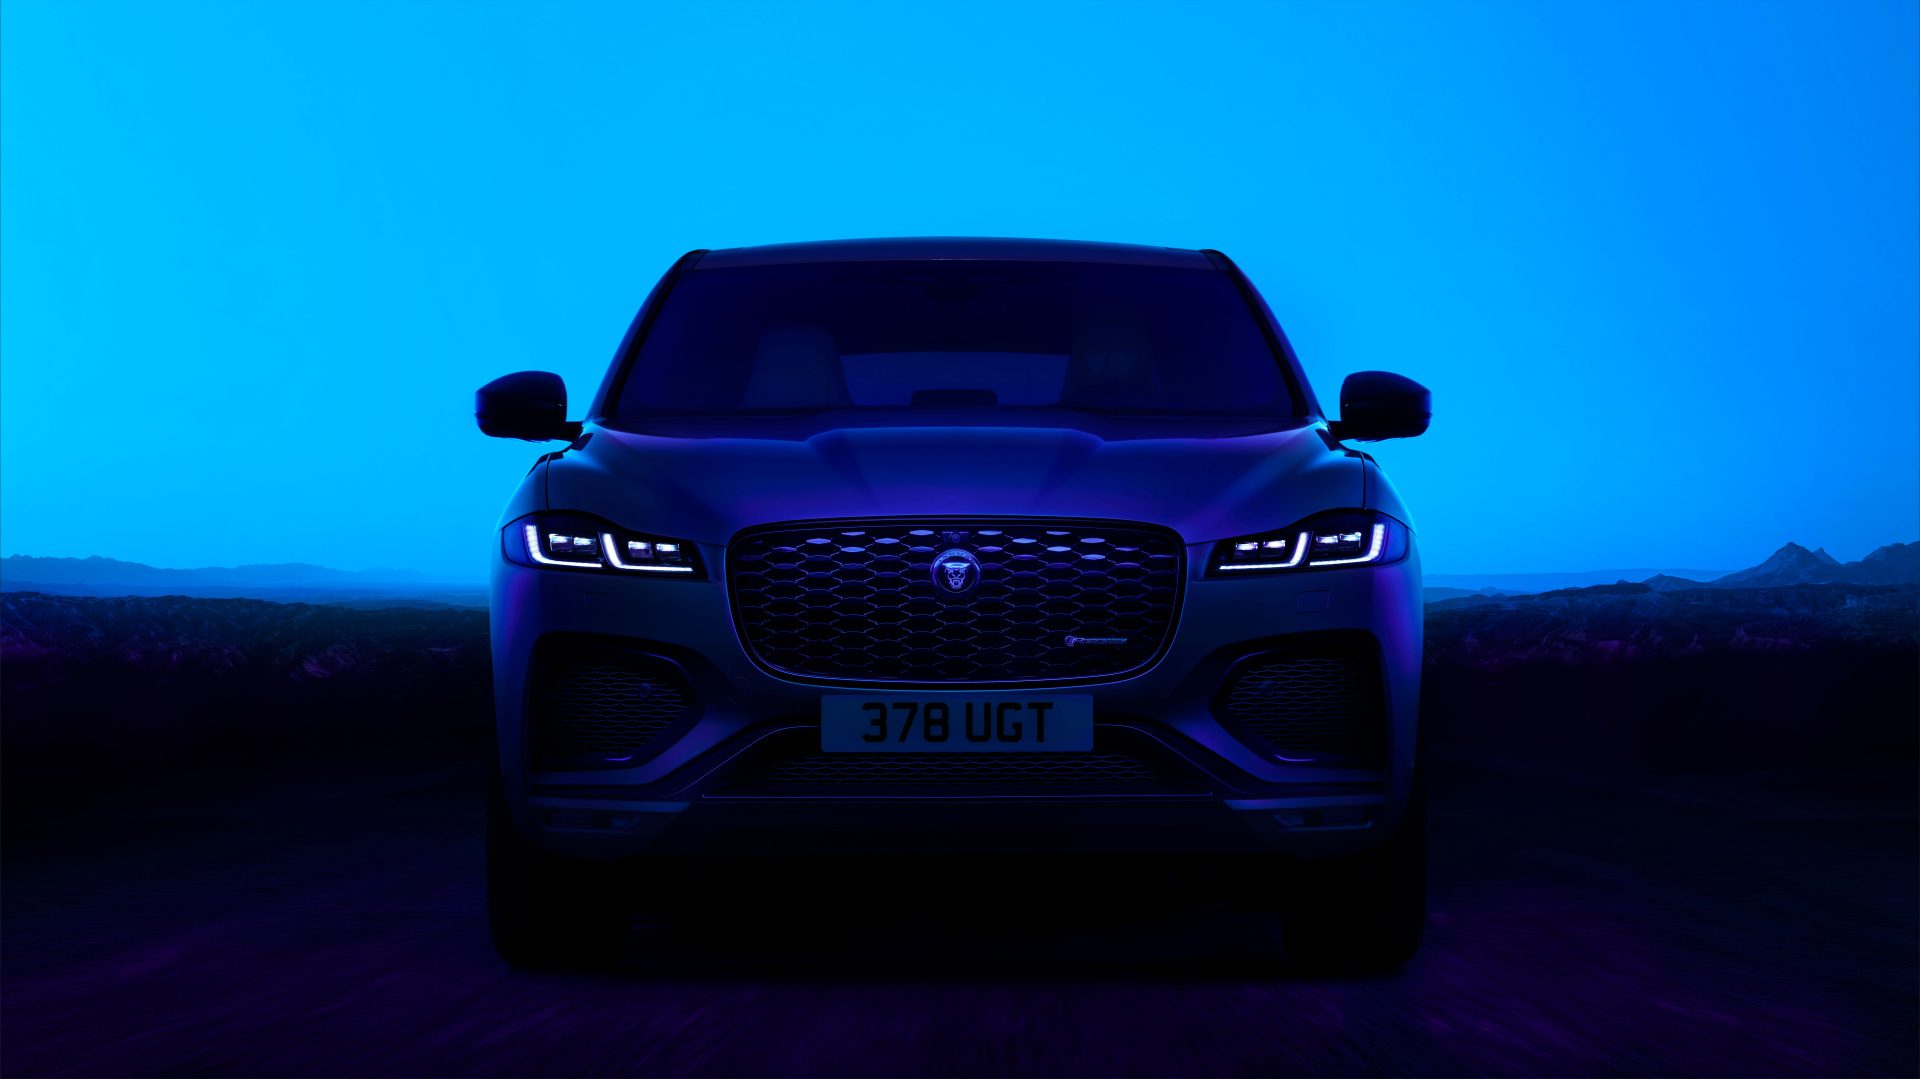 SMALL_Jag_F-PACE_24MY_Exterior_05_Front_GL_003_PR_141222